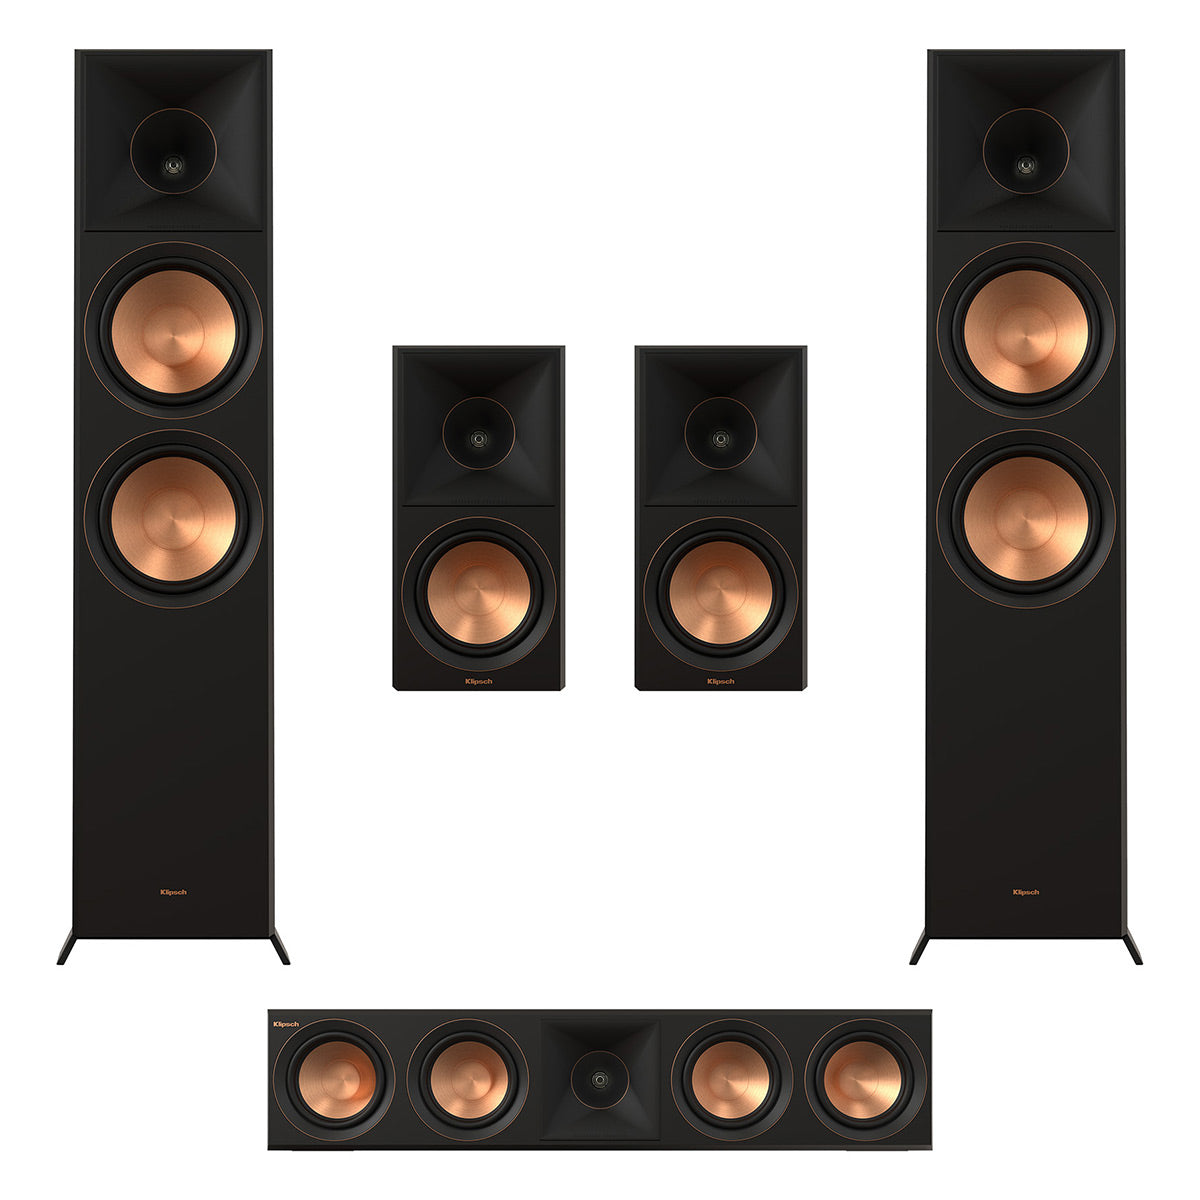 Klipsch 5.1 Ebony Home Theater System with 2 RP280F Tower Speaker